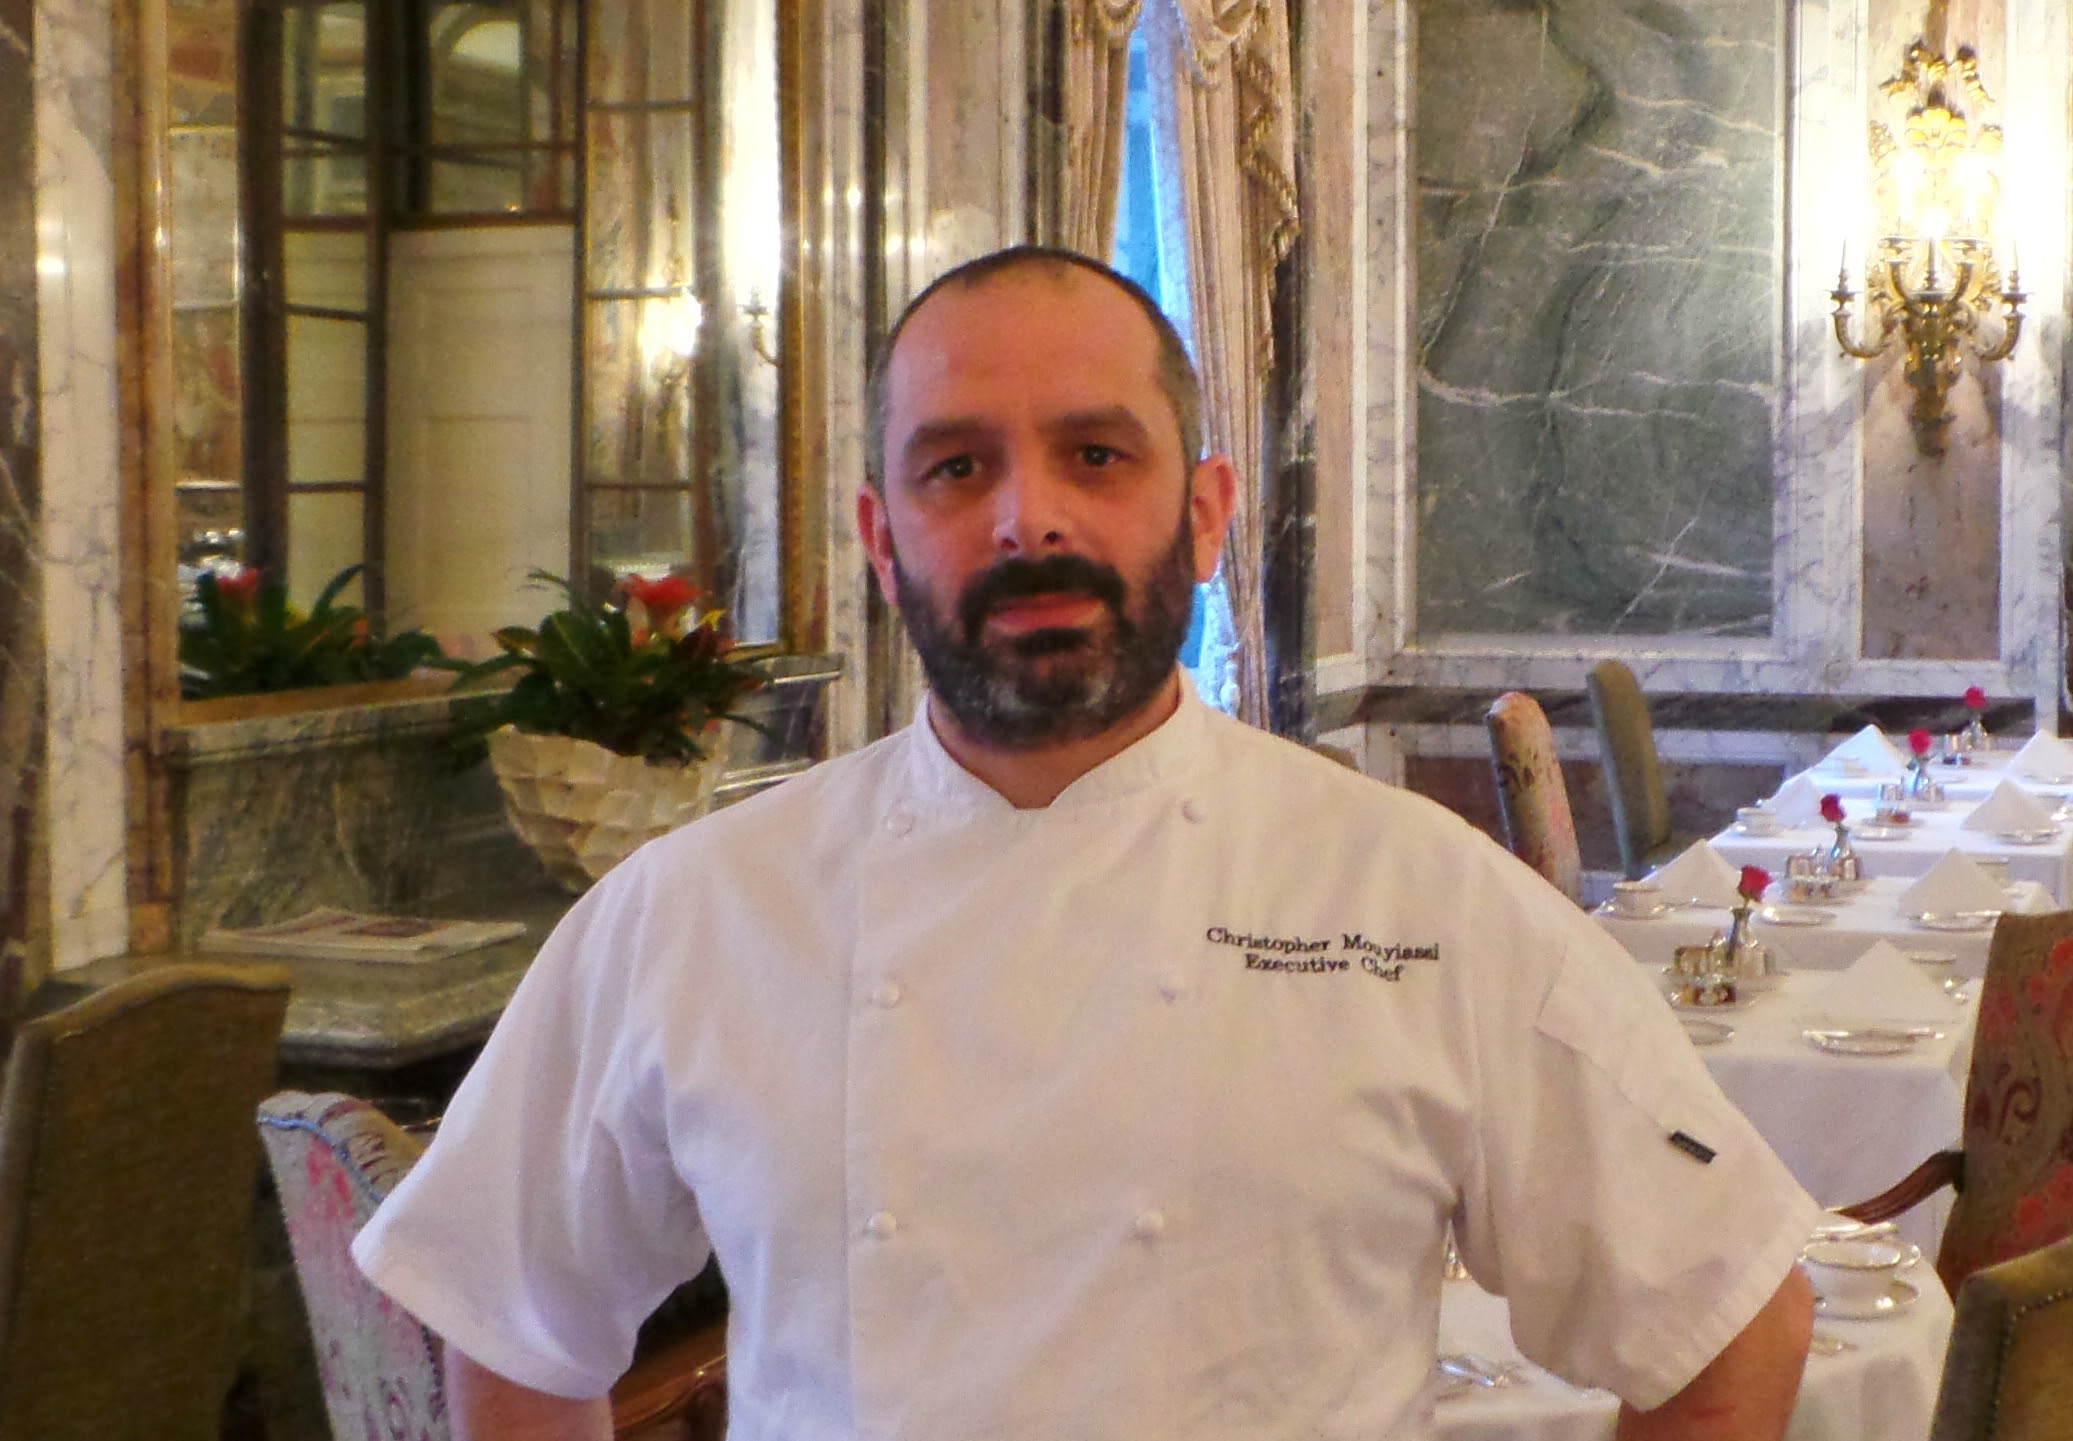 Luton Hoo Hotel, Golf & Spa appoints Christopher Mouyiassi as Executive Head Chef